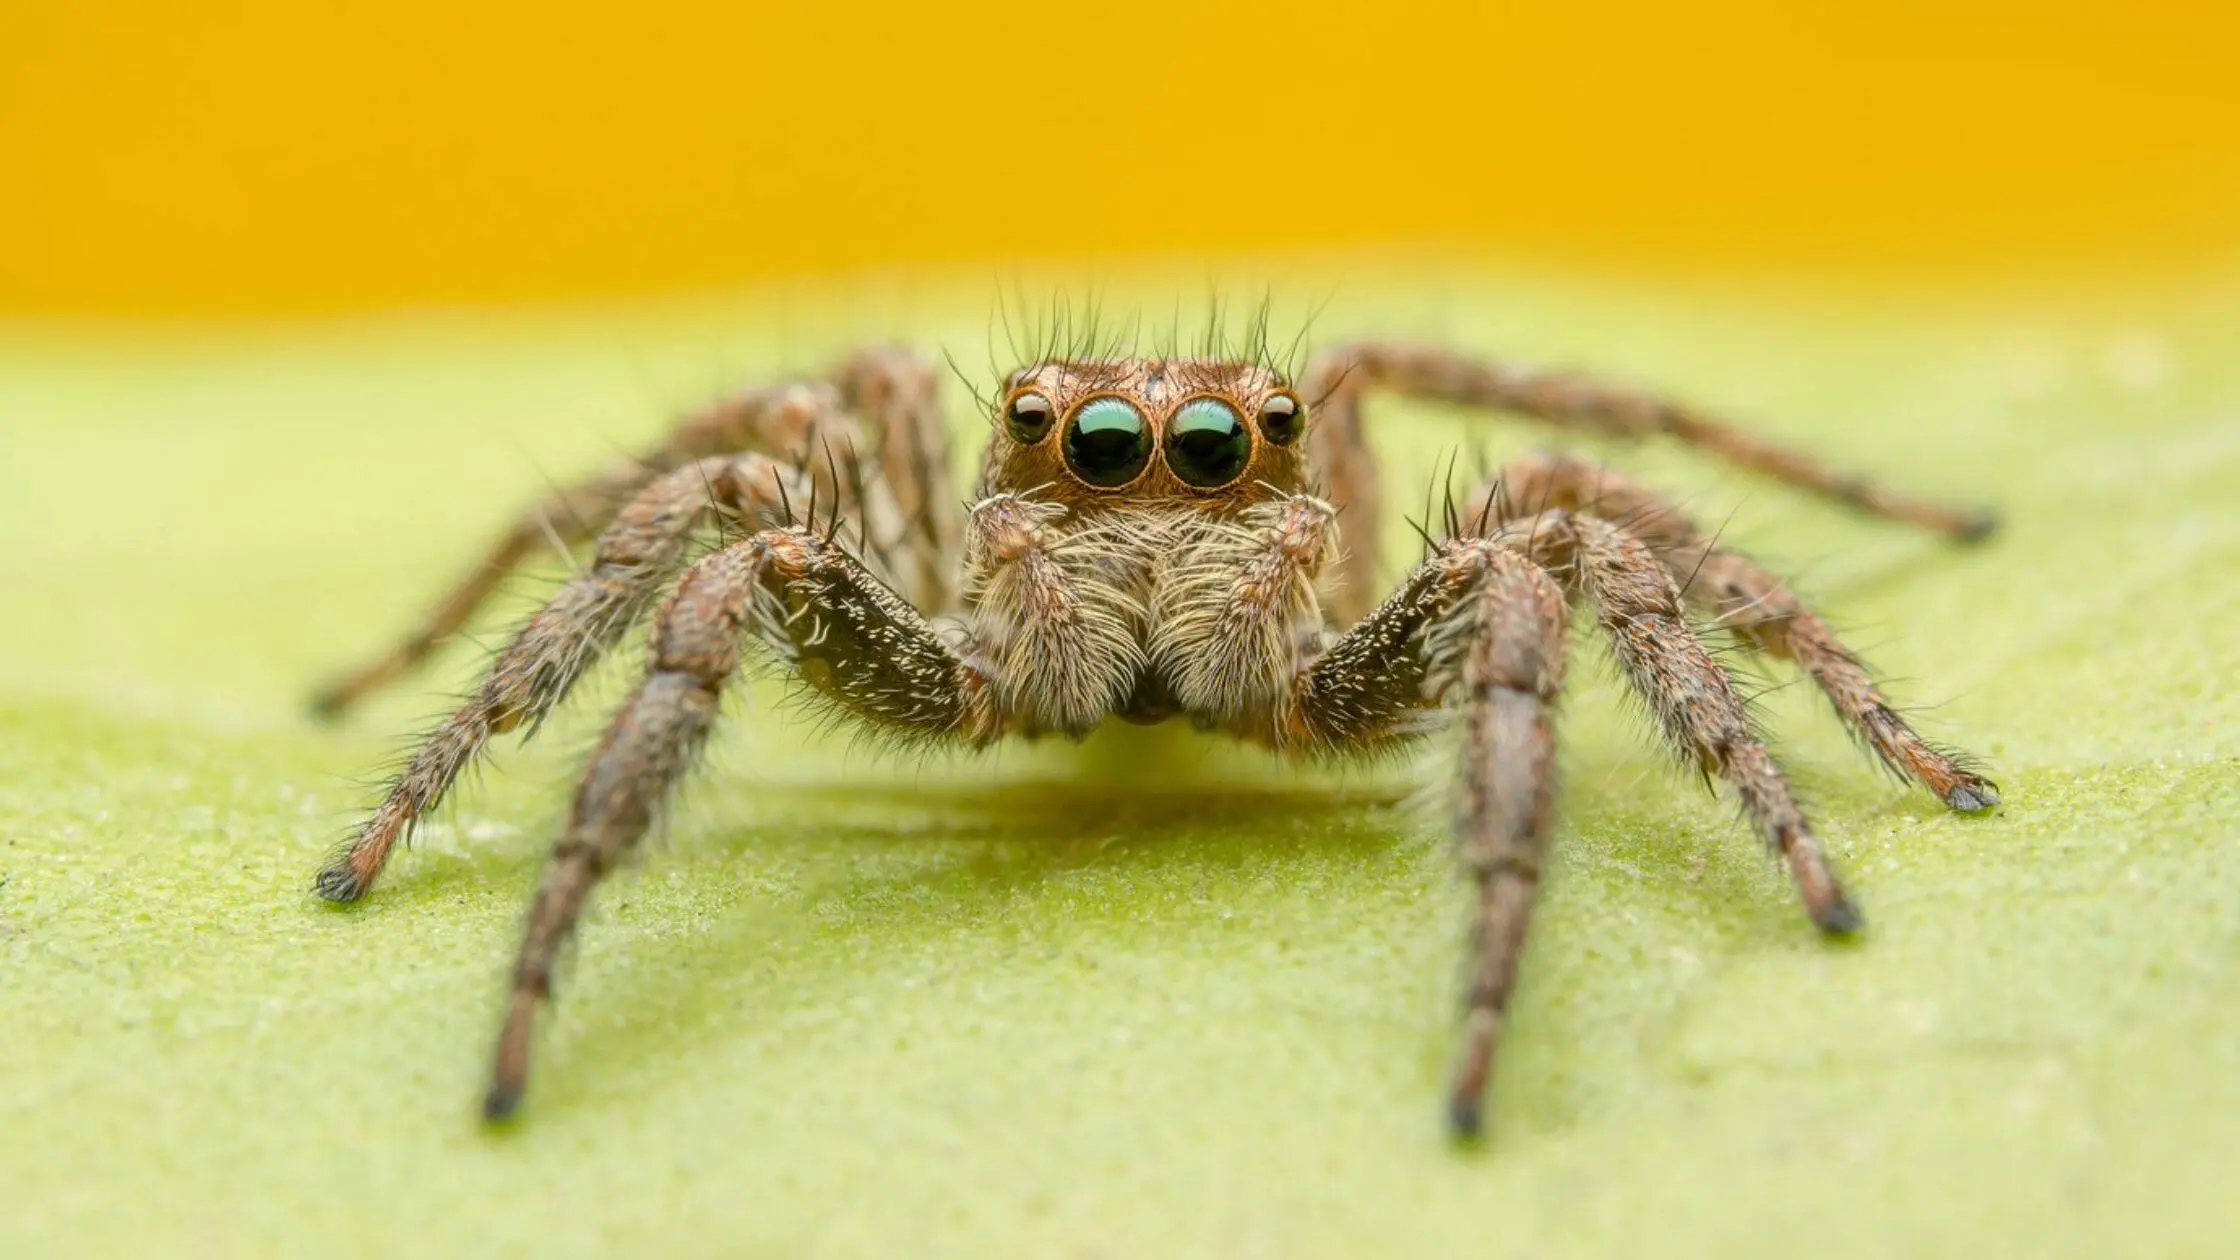 Explore Hunting Habits and Dietary Secrets of Jumping Spiders